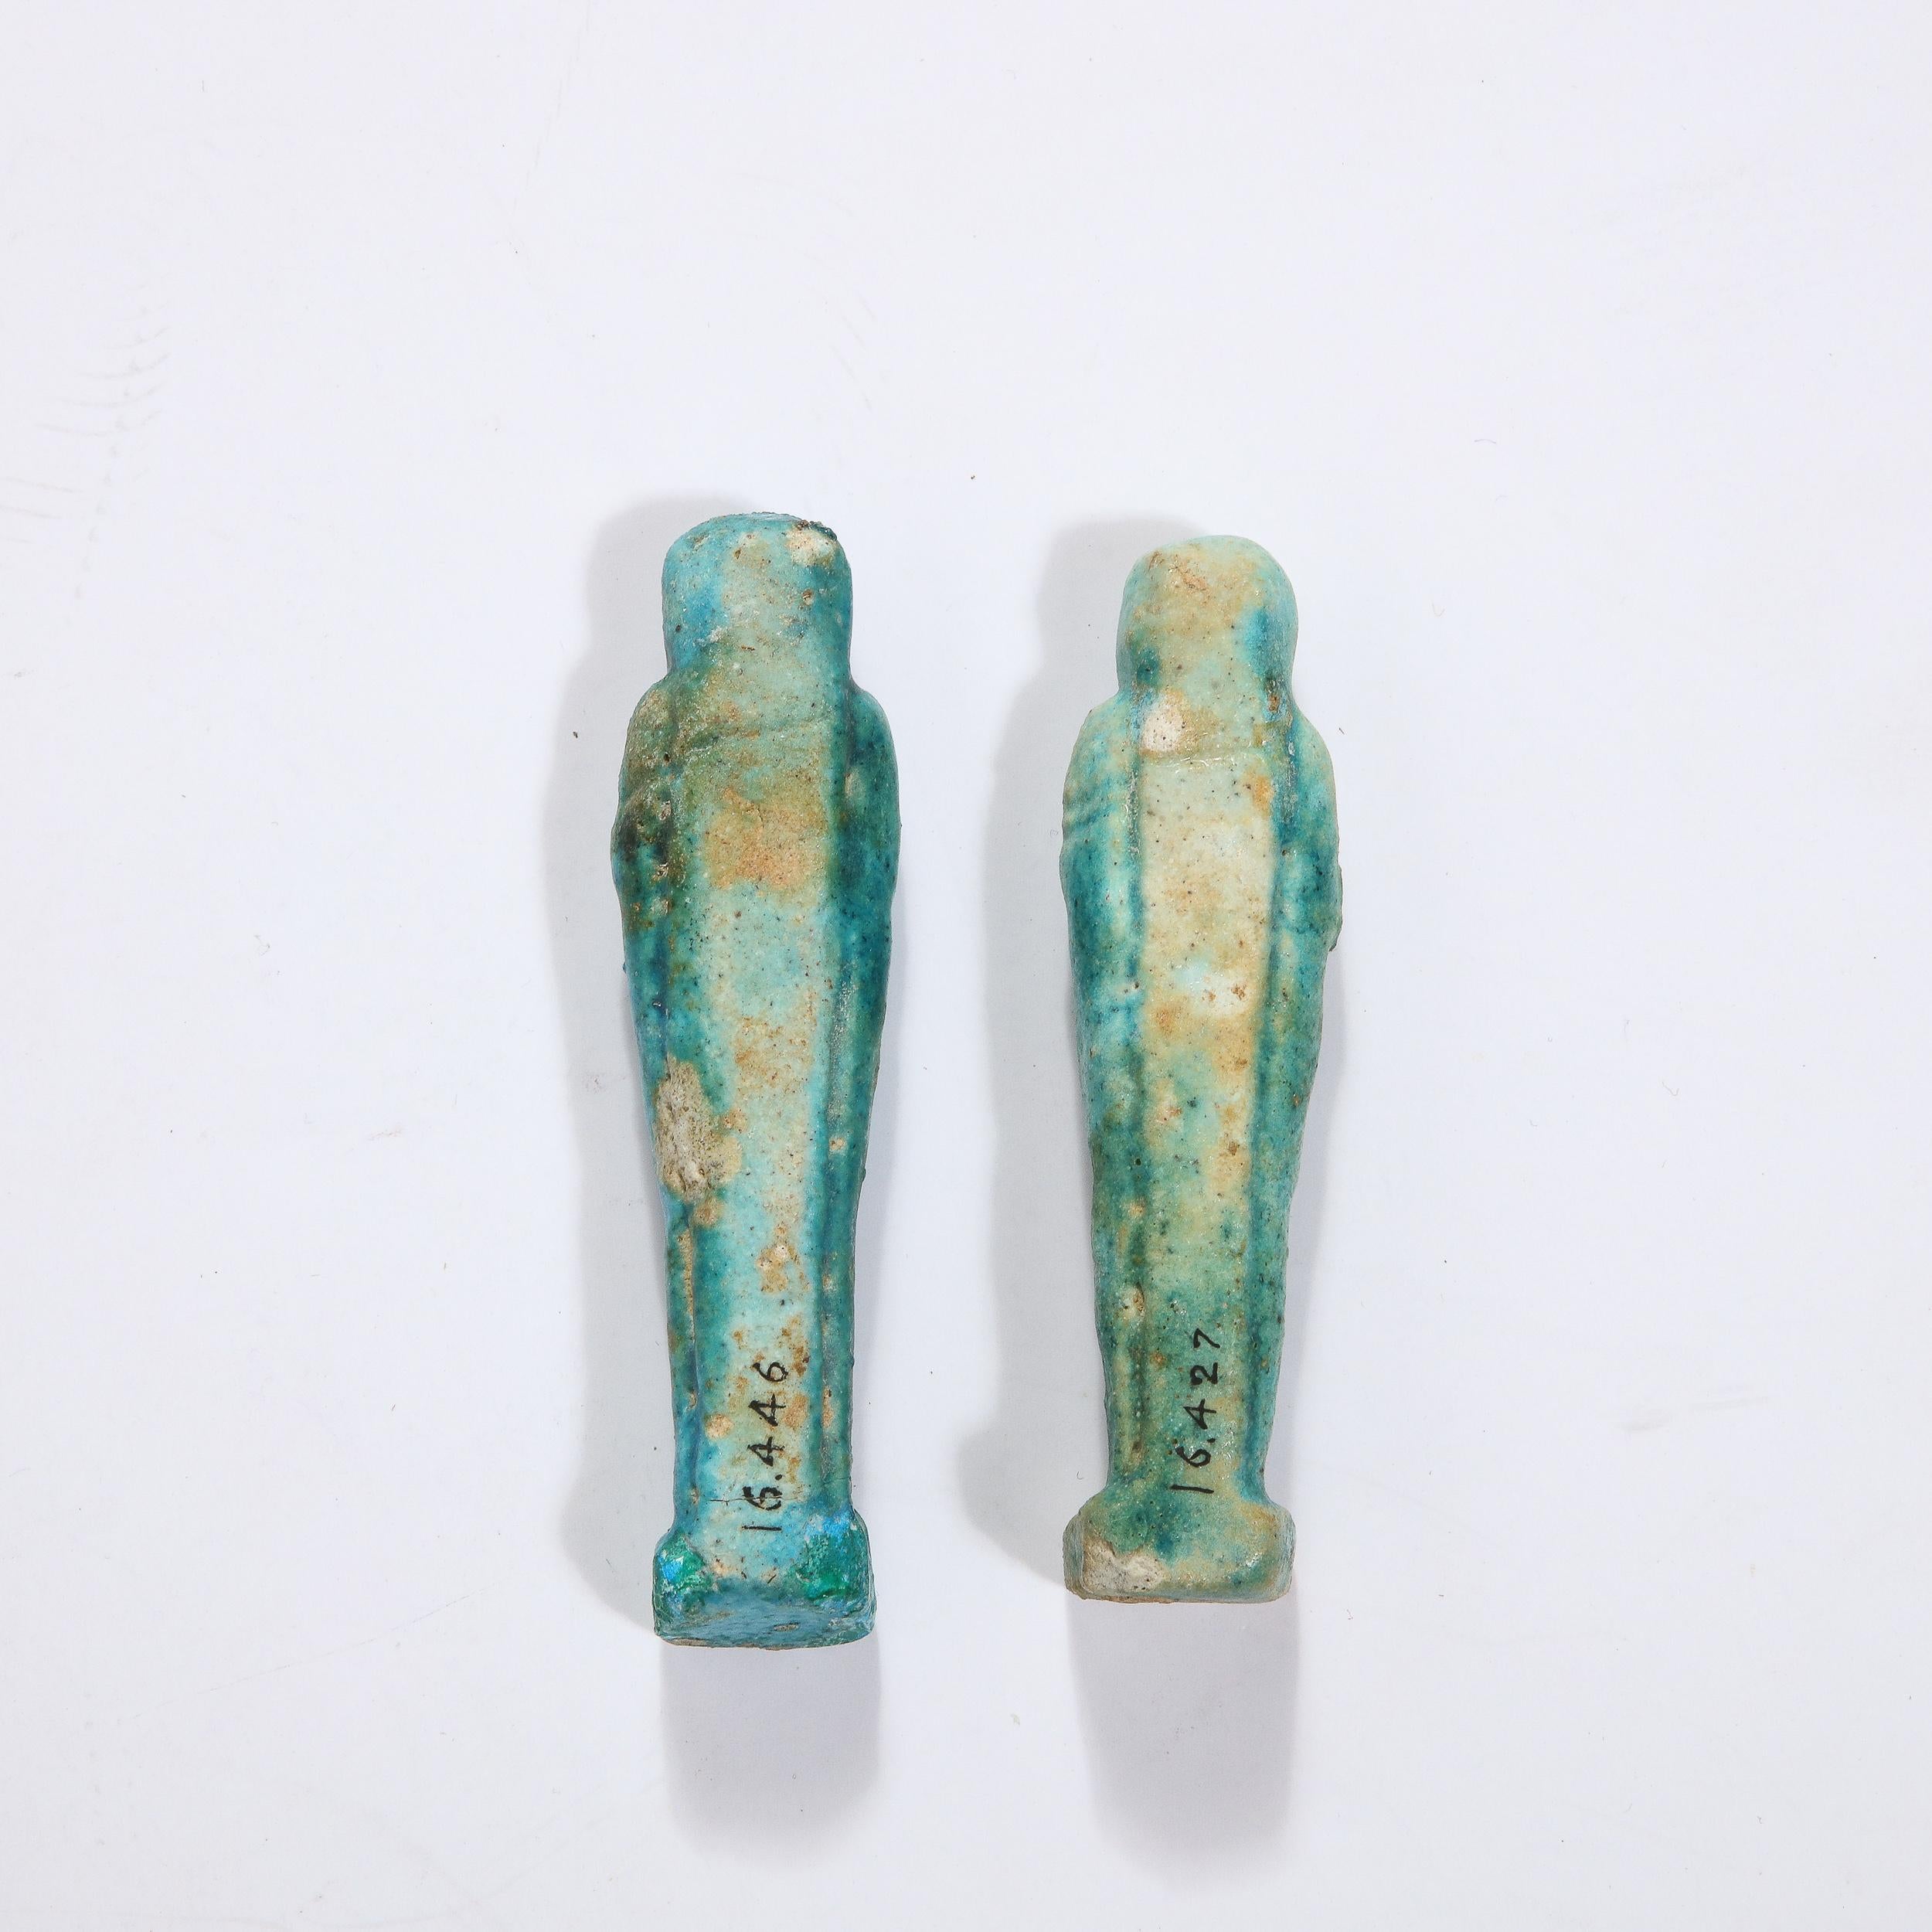 Set of Four Egyptian Antiquities, Pair of Sarcophagus Faience & Two Figurines For Sale 11